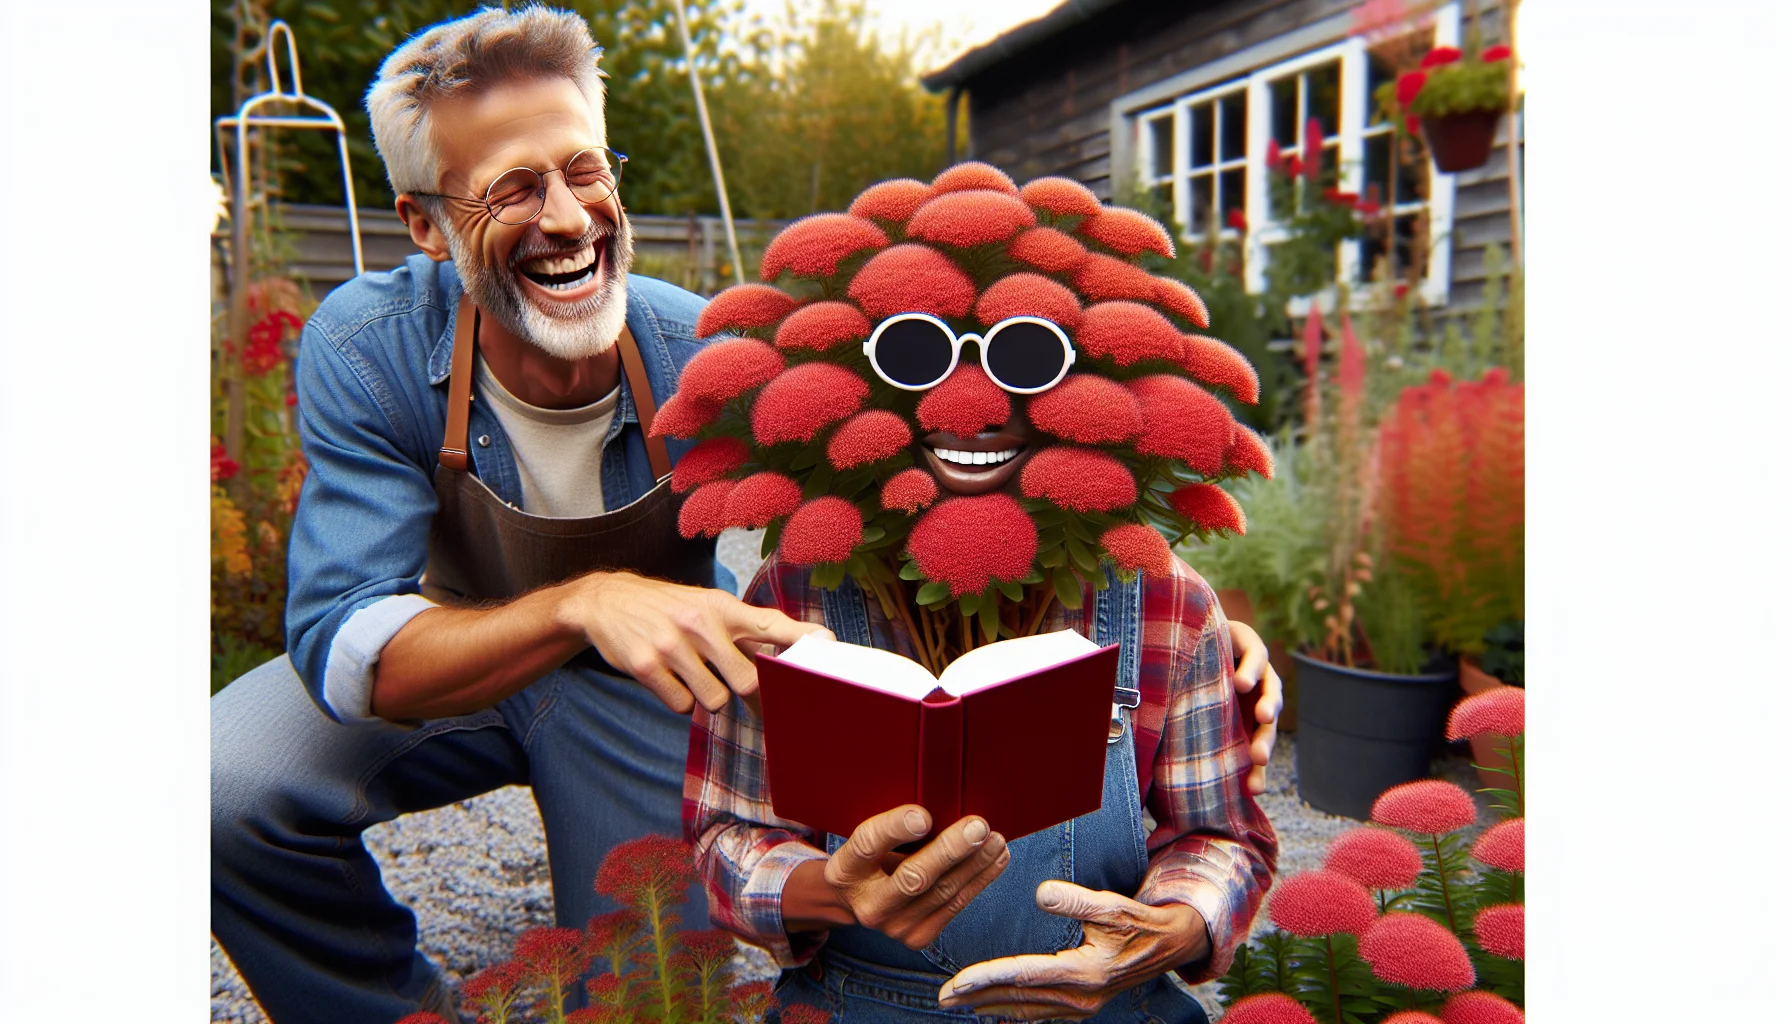 Craft an image displaying autumn fire sedum in a humorous situation meant to make gardening attractive. Picture it with vibrant red flowers revealing the essence of autumn. It might be wearing tiny sunglasses or reading a miniature book, providing a fun, anthropomorphic touch. The background could be a well-maintained garden with various plants and flowers blooming. Include a laughing middle-aged Caucasian man and a young, Black woman, both in gardening attire, who appear to be enjoying the quirky scene. Make the colours and atmosphere radiate the joy and benefits of gardening.